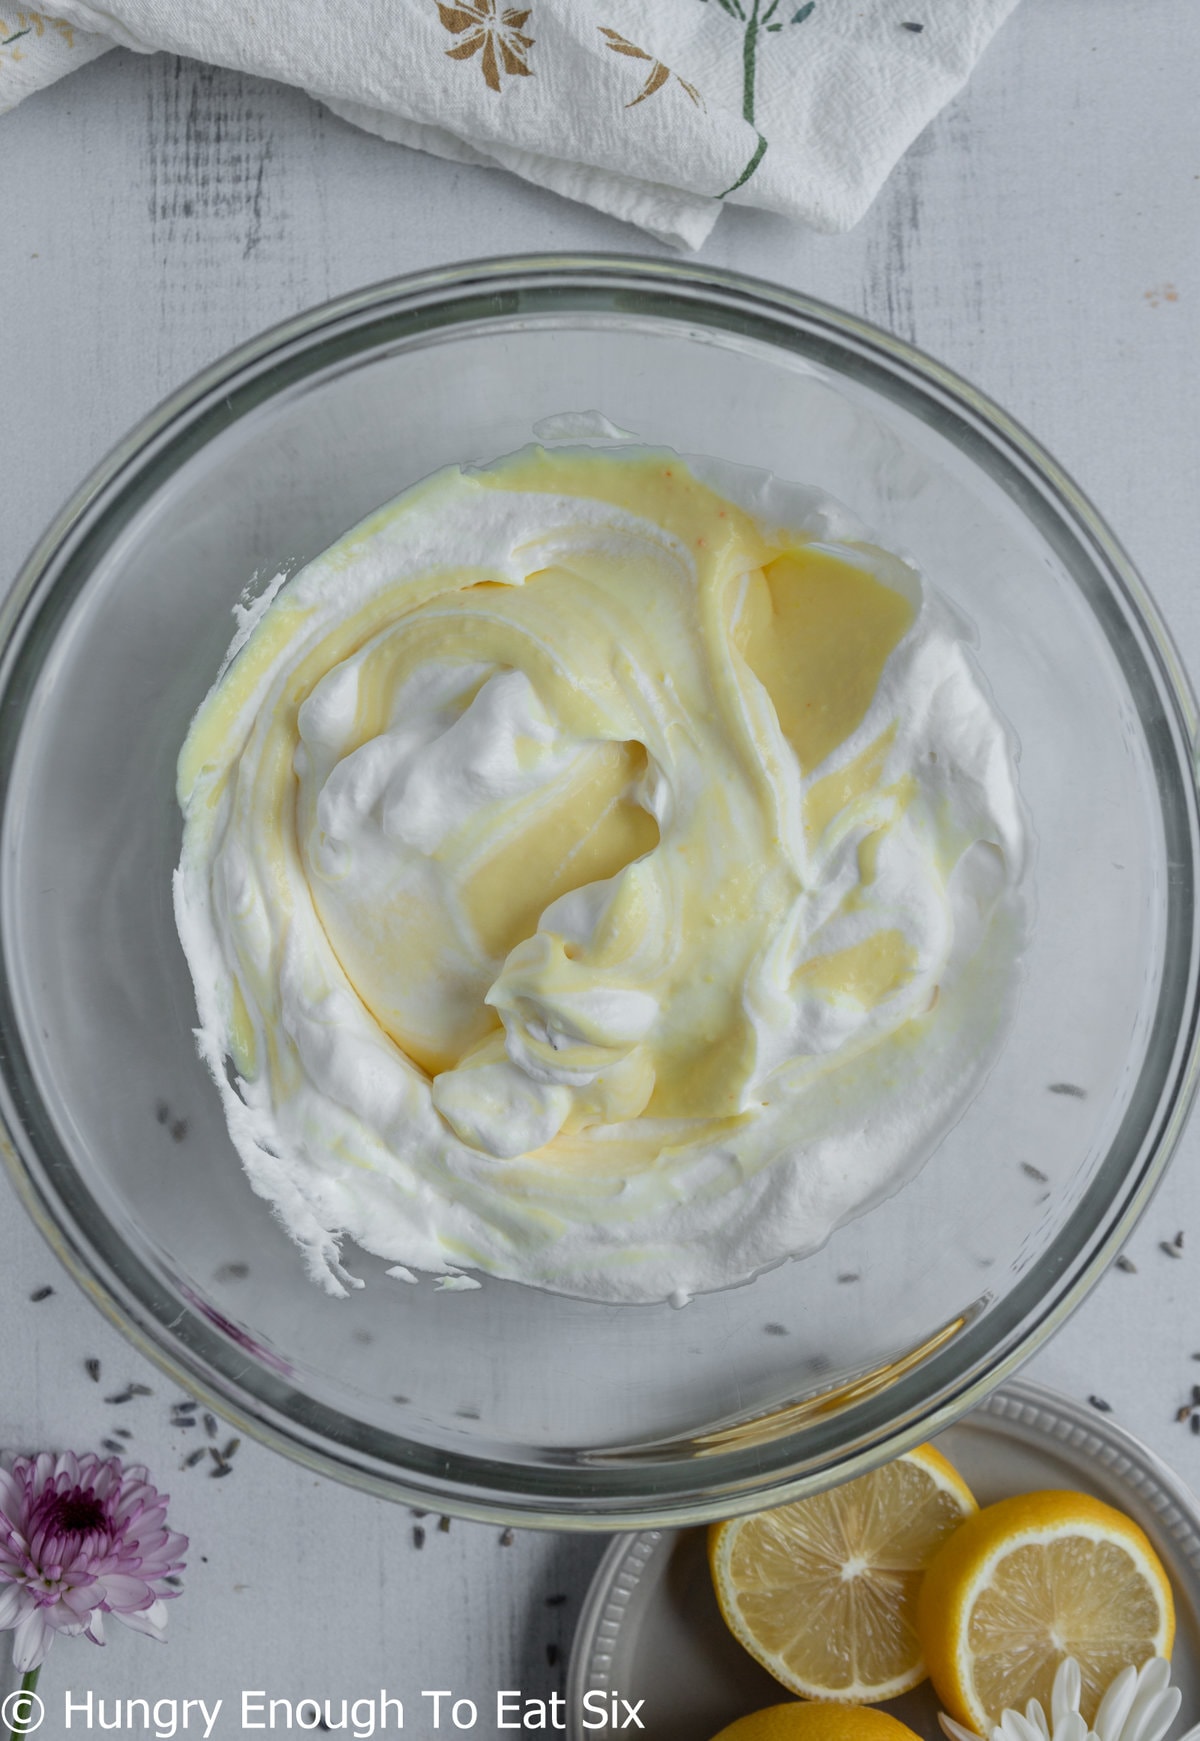 Mixture of yellow pudding and whipped cream in a bowl.